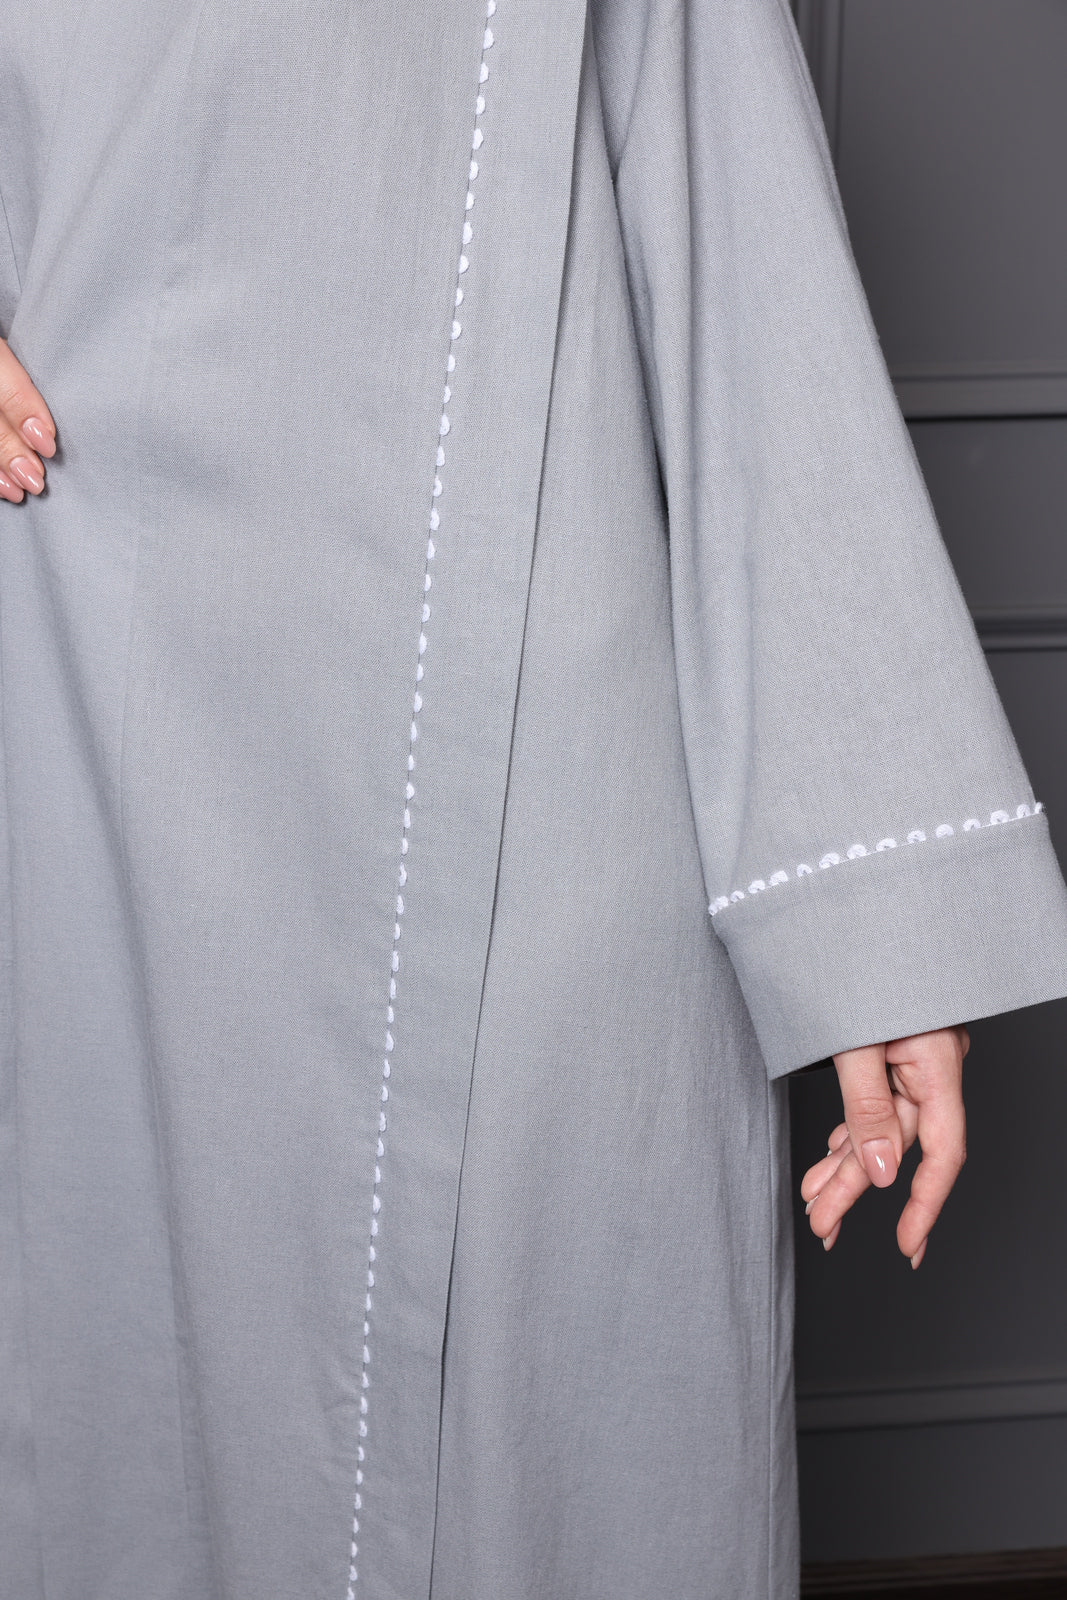 Linen abaya with contrasting piping